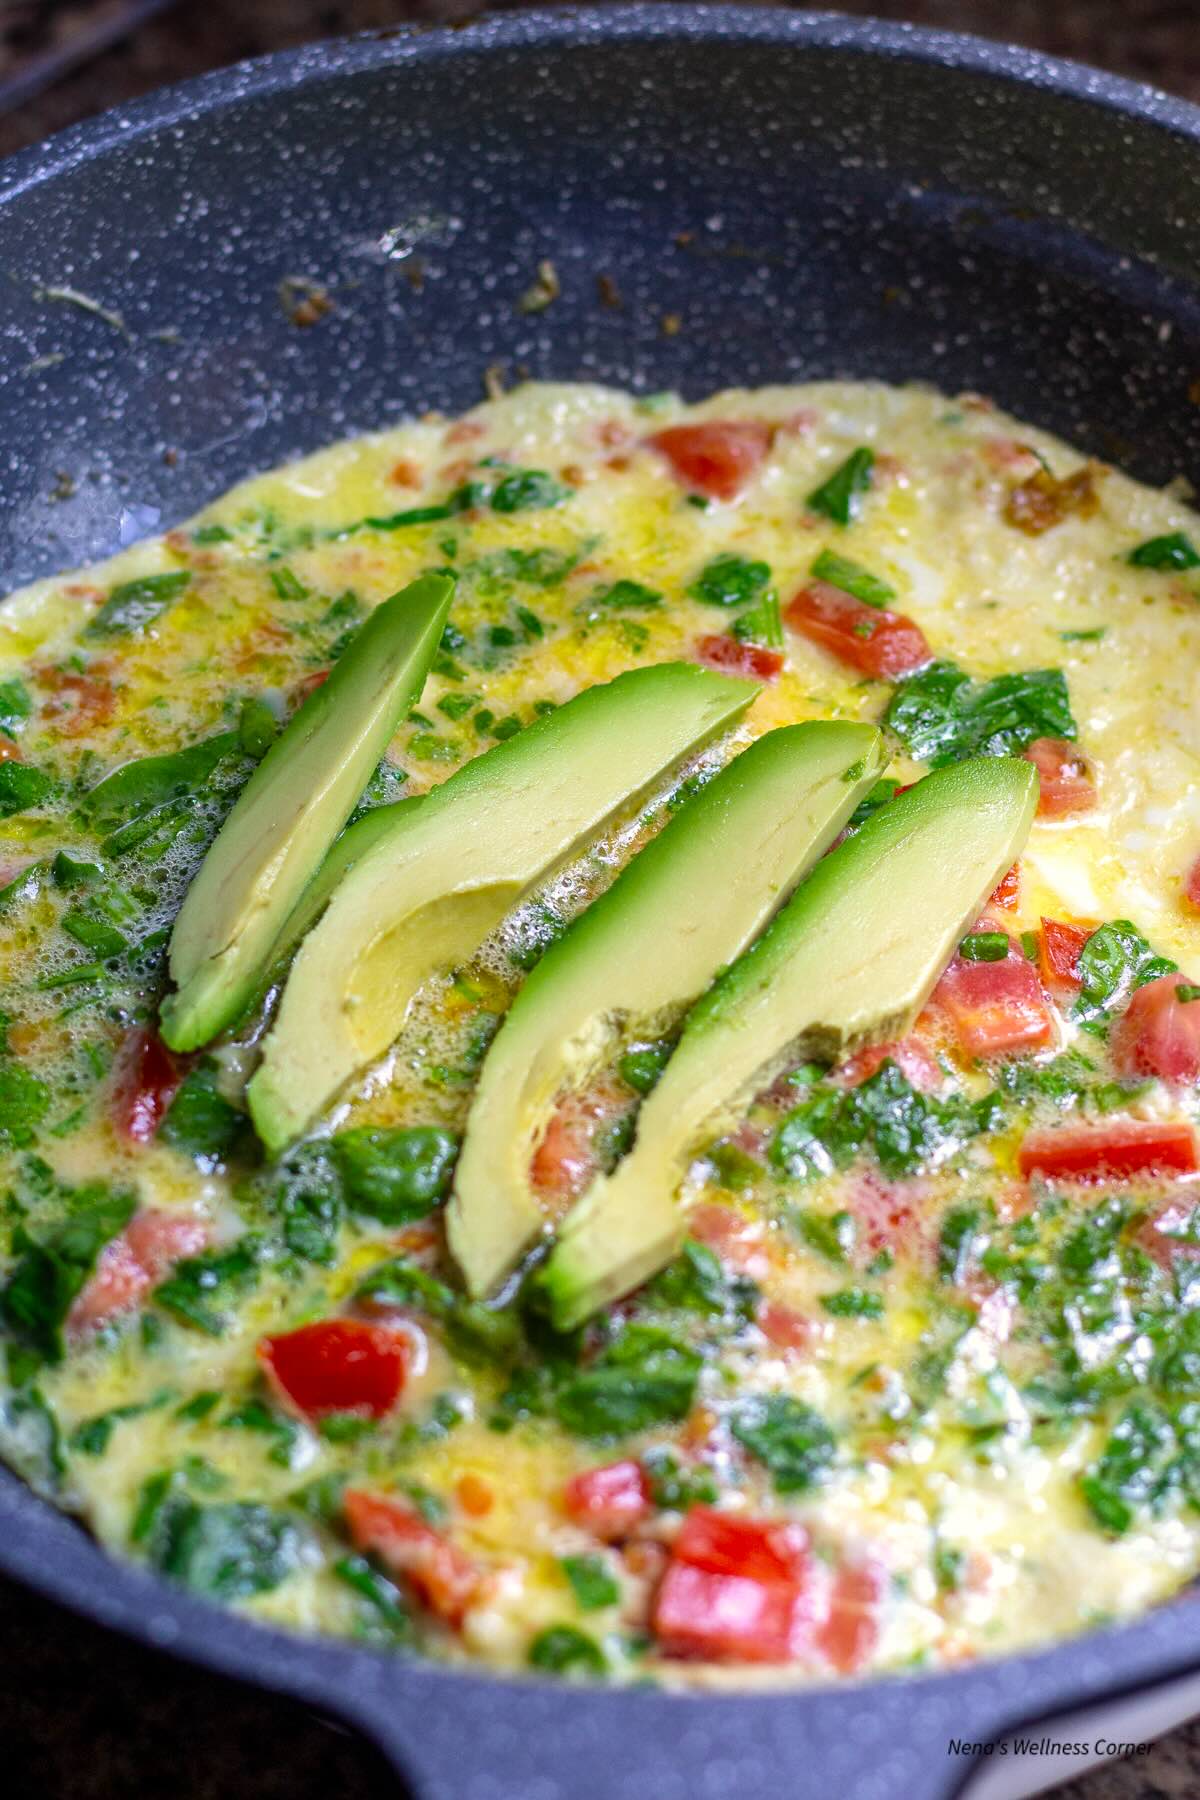 Avocado omelette with spinach and tomato before folding